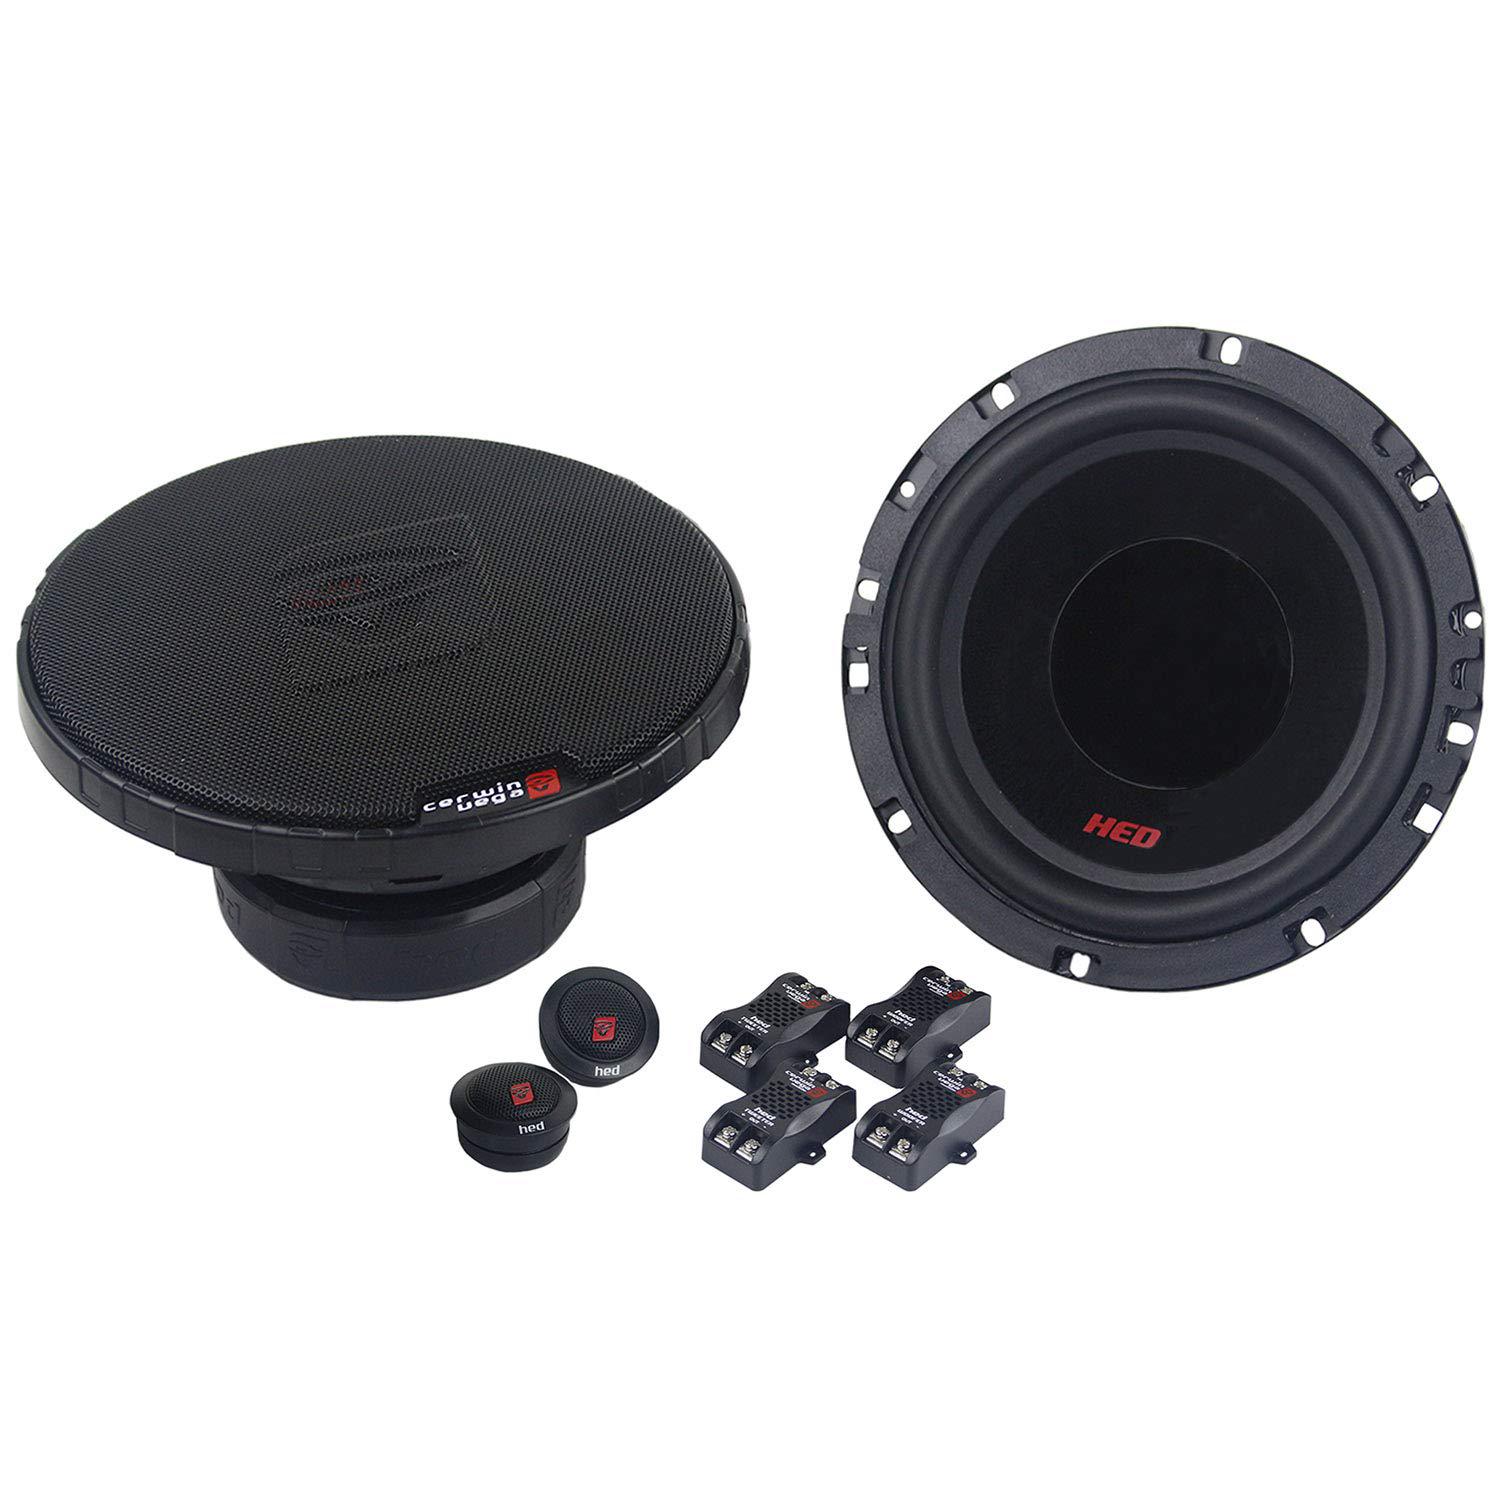 Cerwin-Vega cerwin vega h765c 6.5" 2-way component speaker systems tweeters crossovers included (2 pairs)